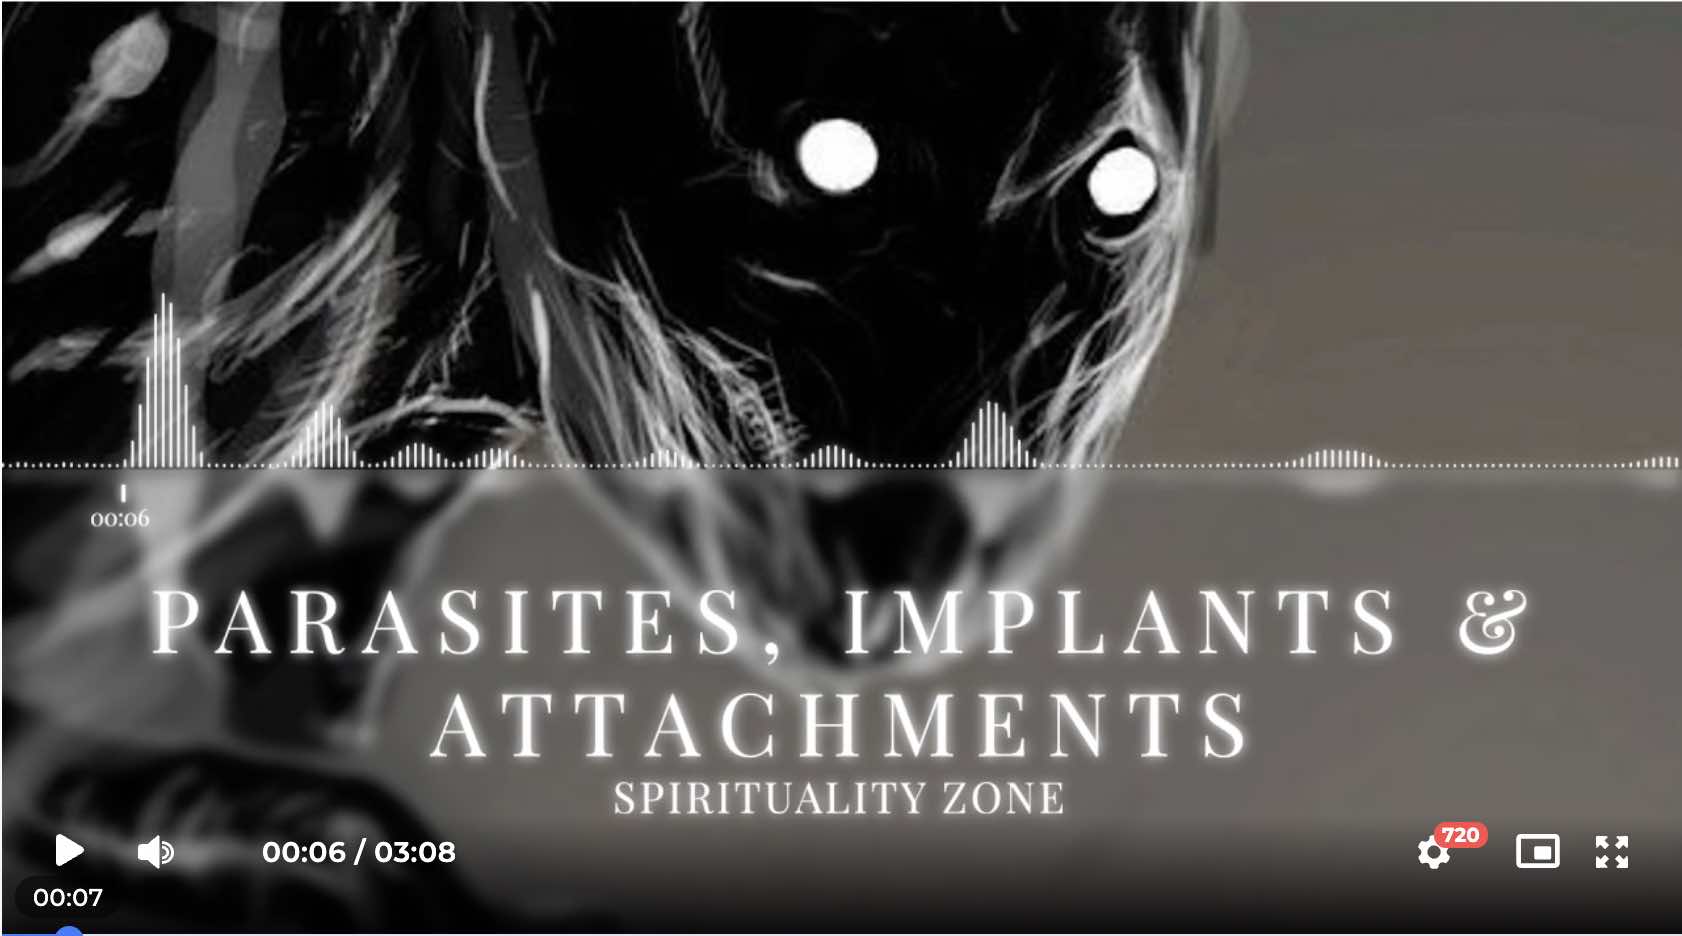 Remove Parasites, Implants and Attachments